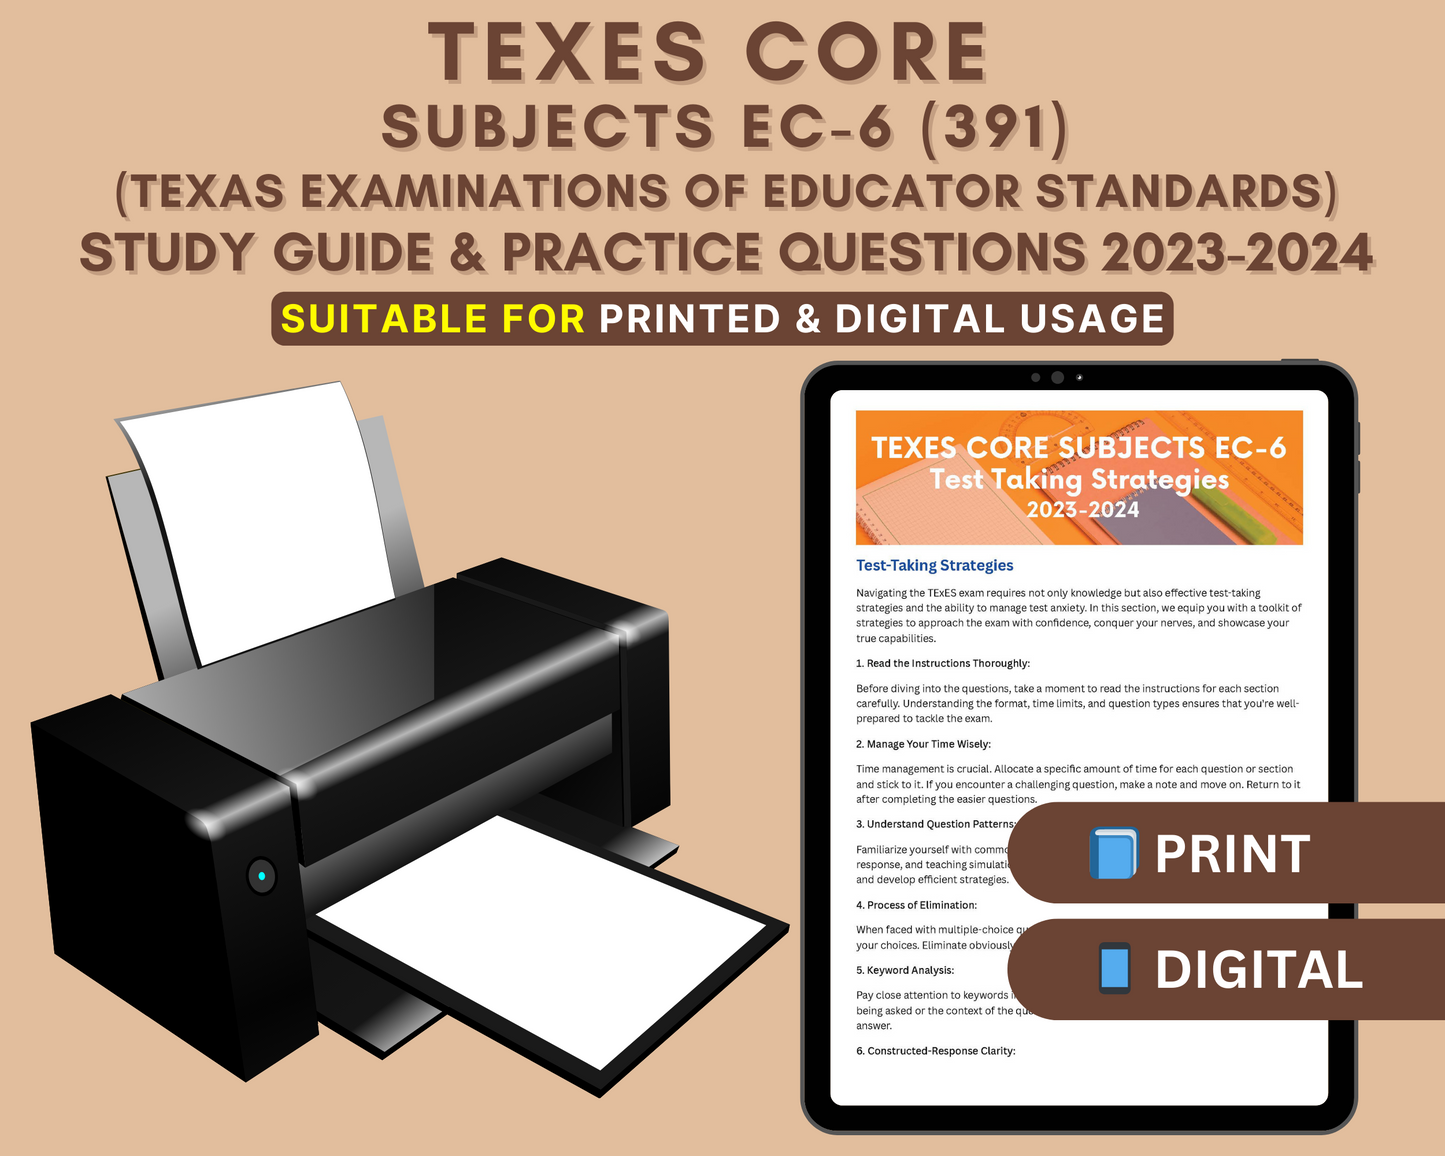 TExES Core Subjects EC-6 (391) Study Guide 2023-2024: Texas Educator Certification Prep with Practice Tests & Exam Tips